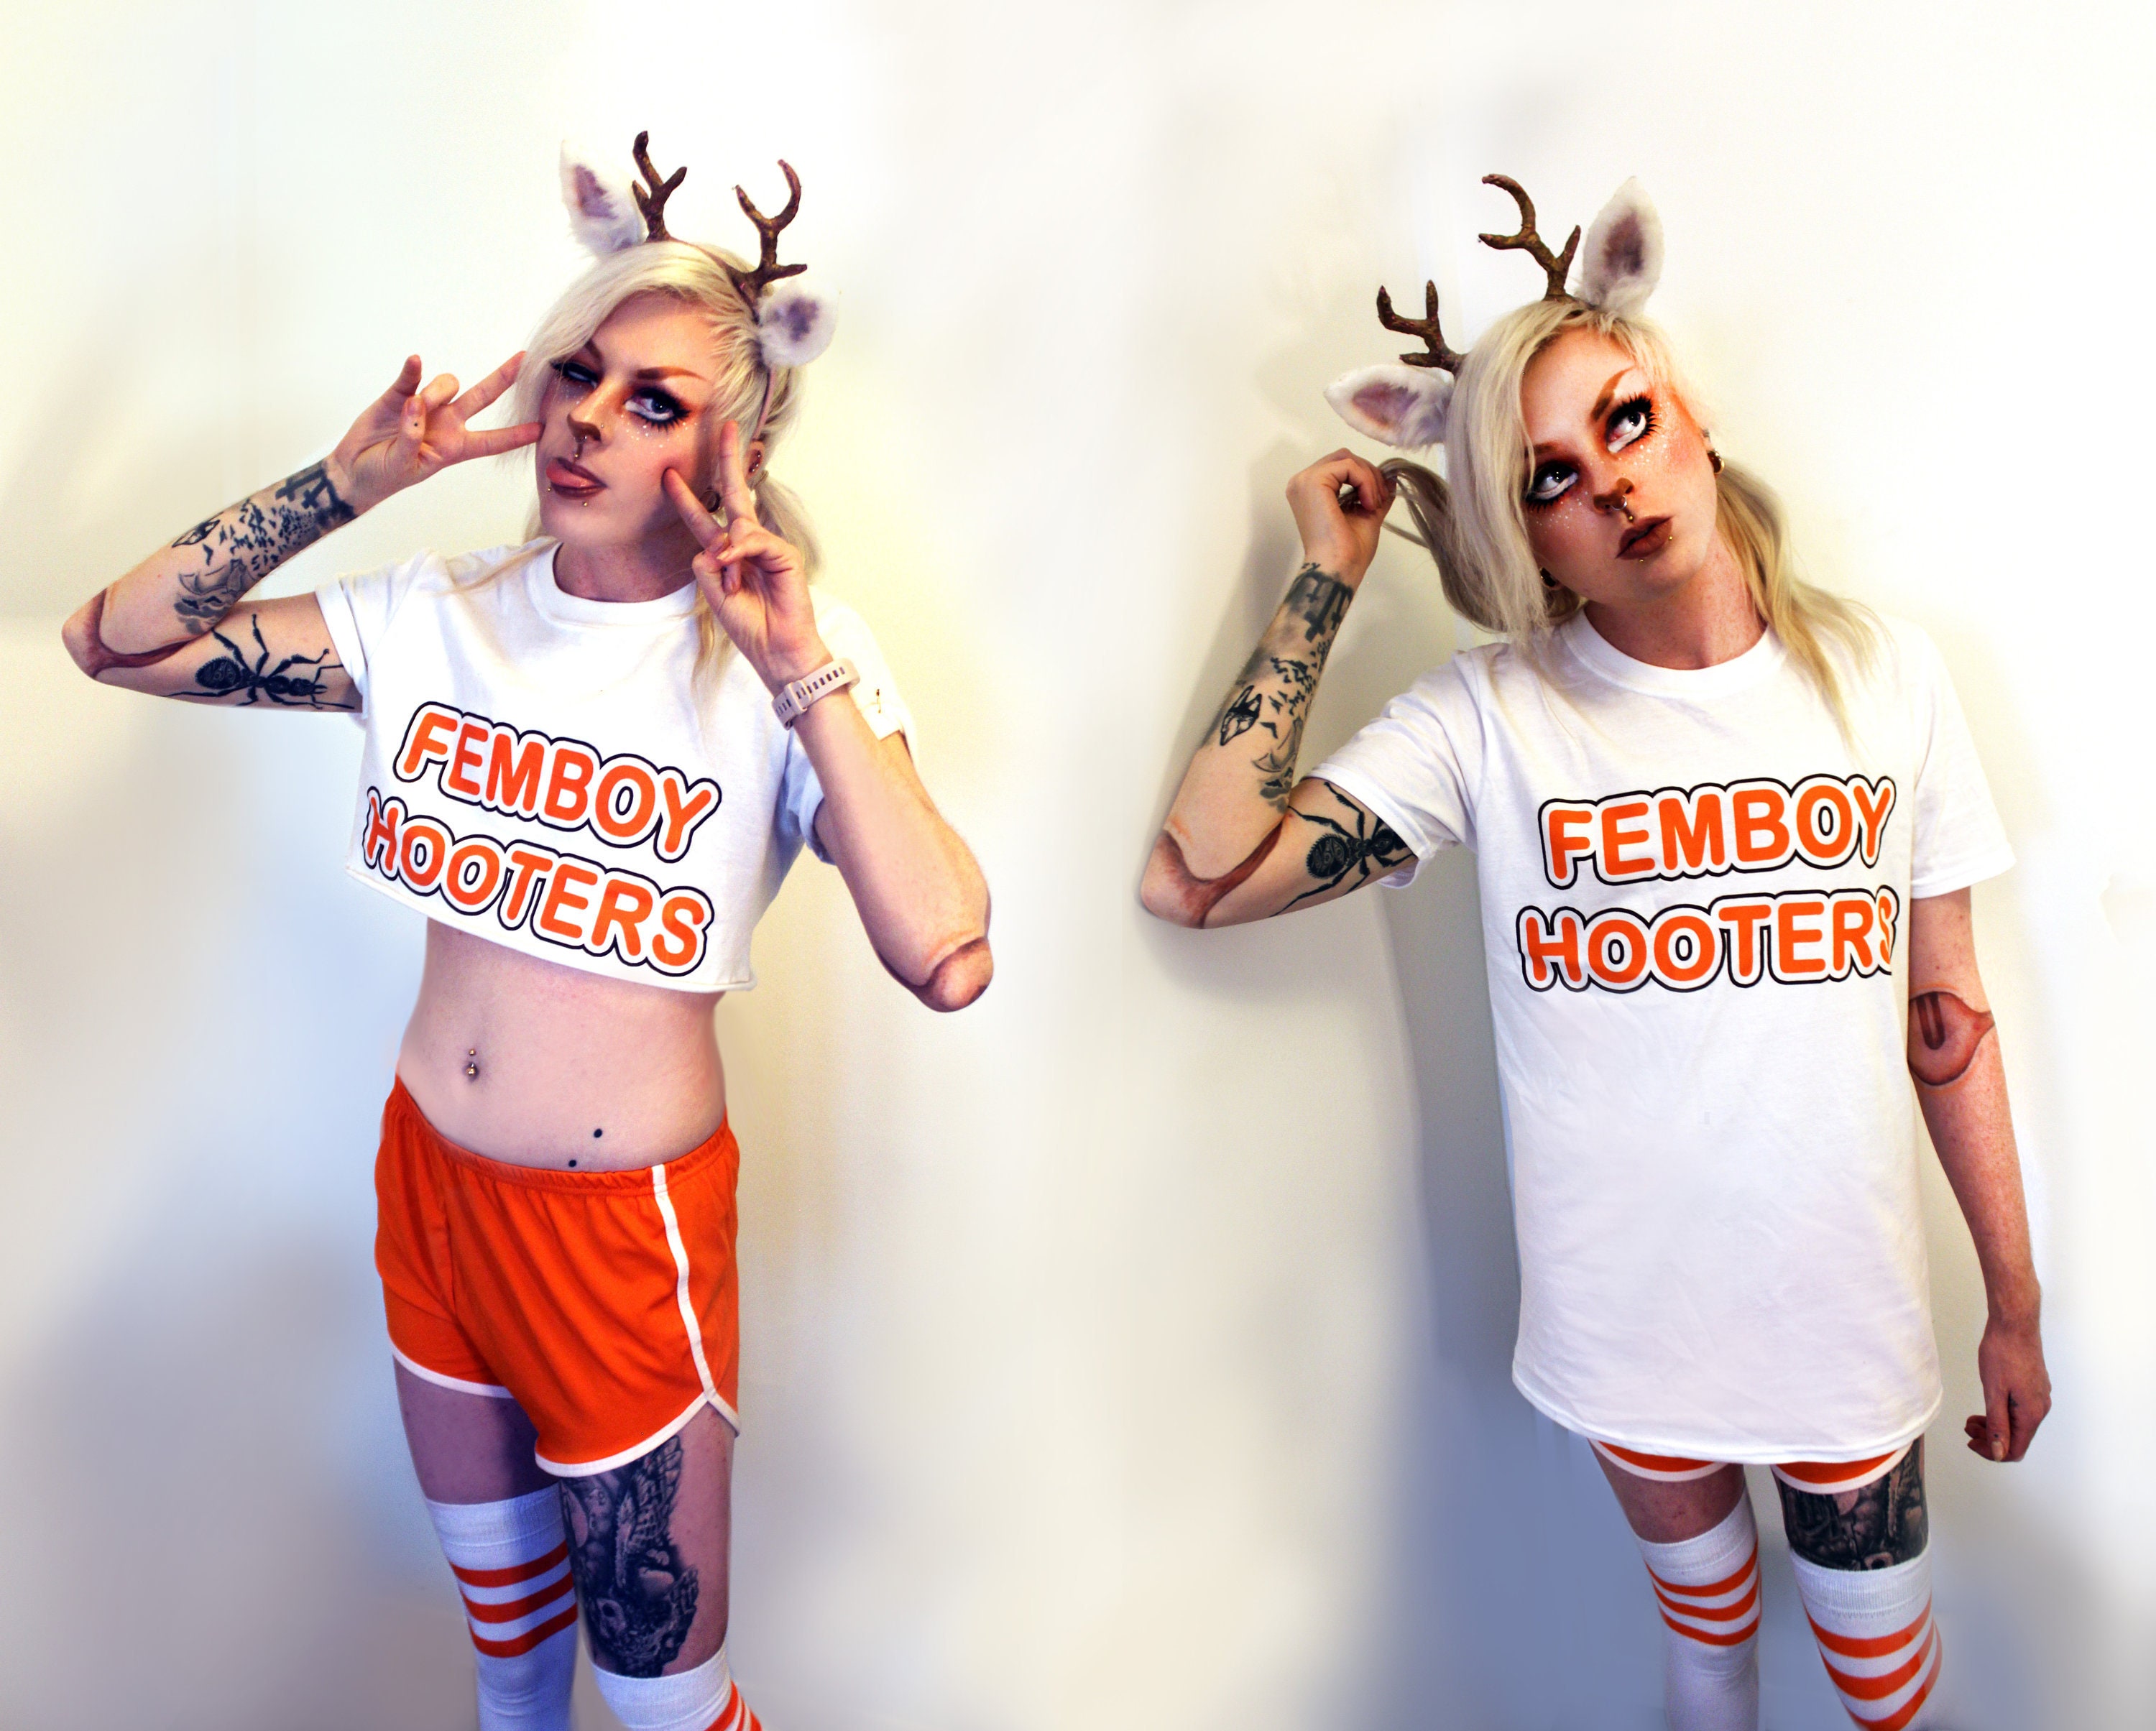 azdi fairuz recommends Is Femboy Hooters Real